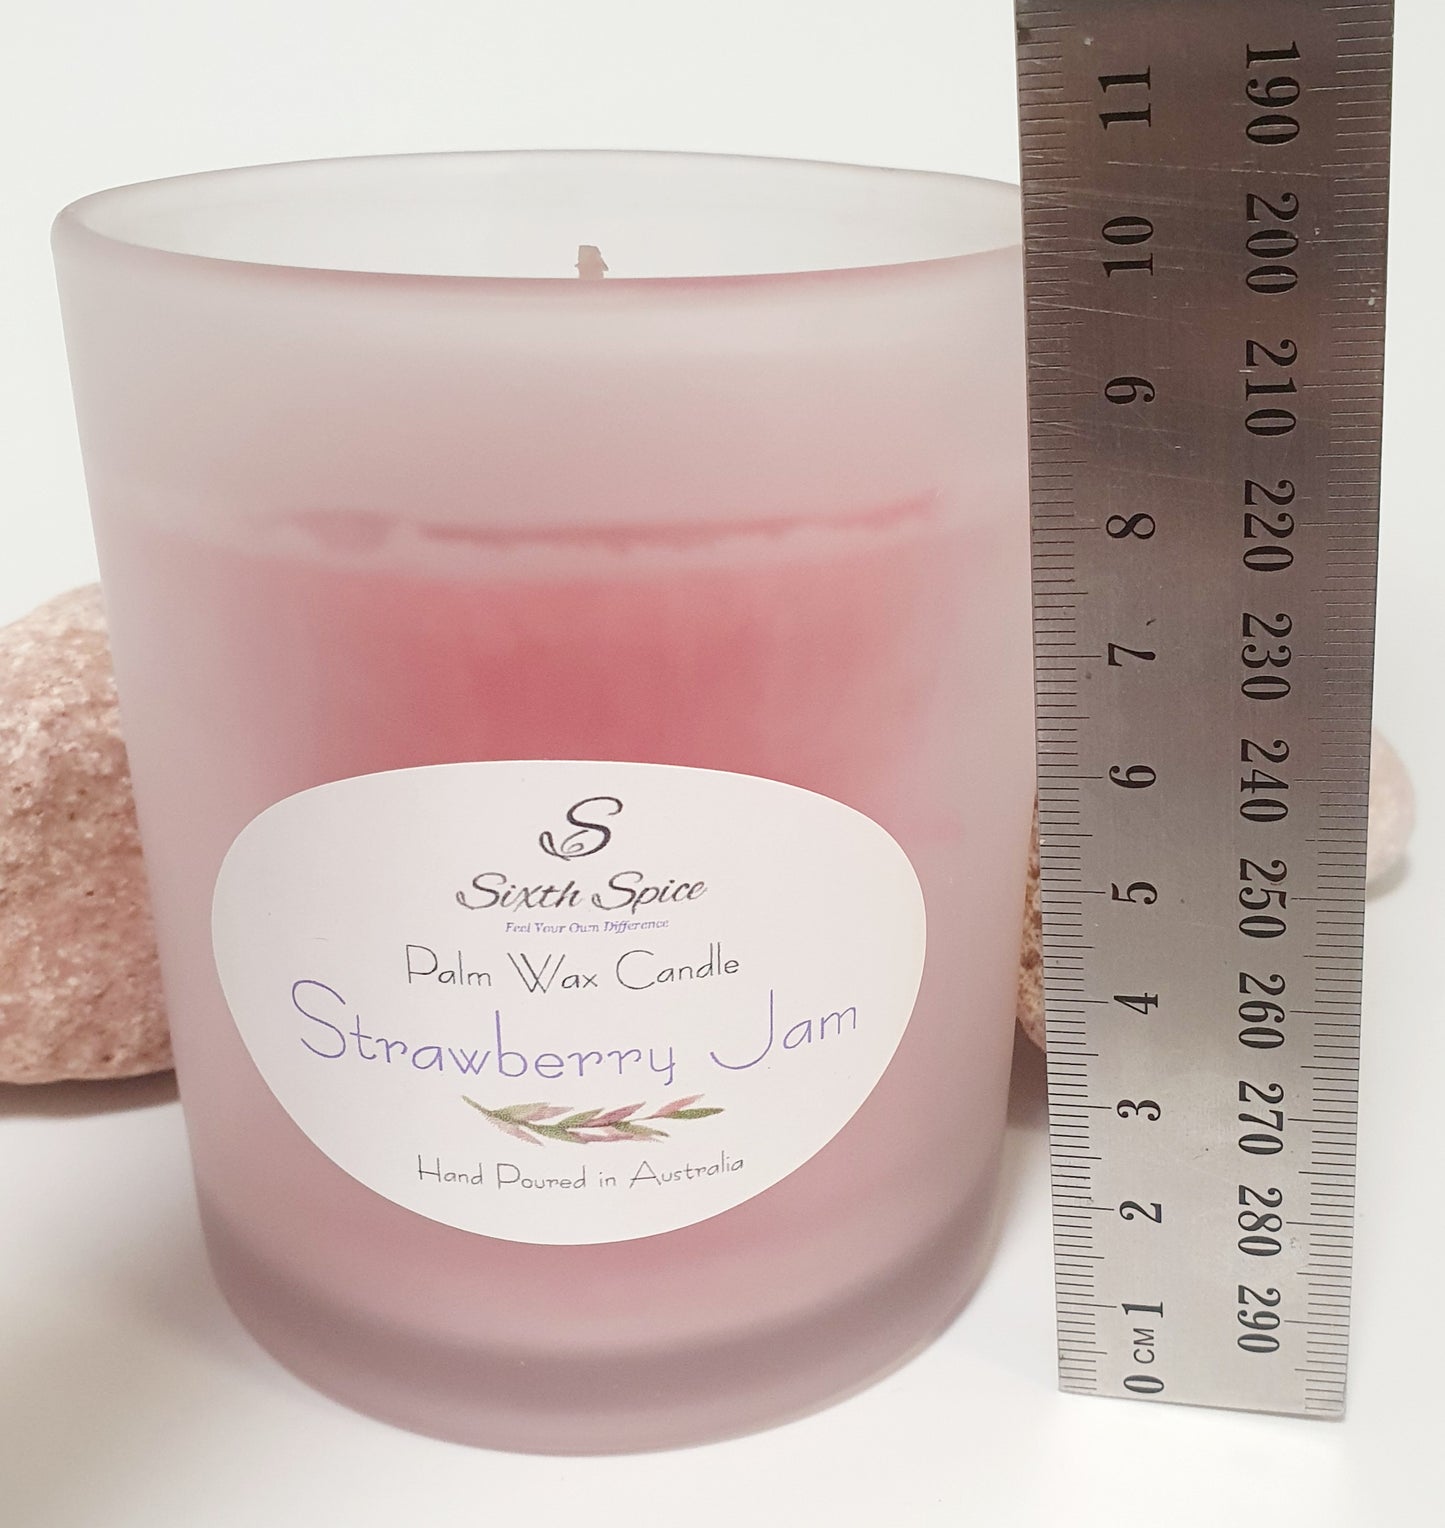 Strawberry Jam Scented Large Palm Wax Candle